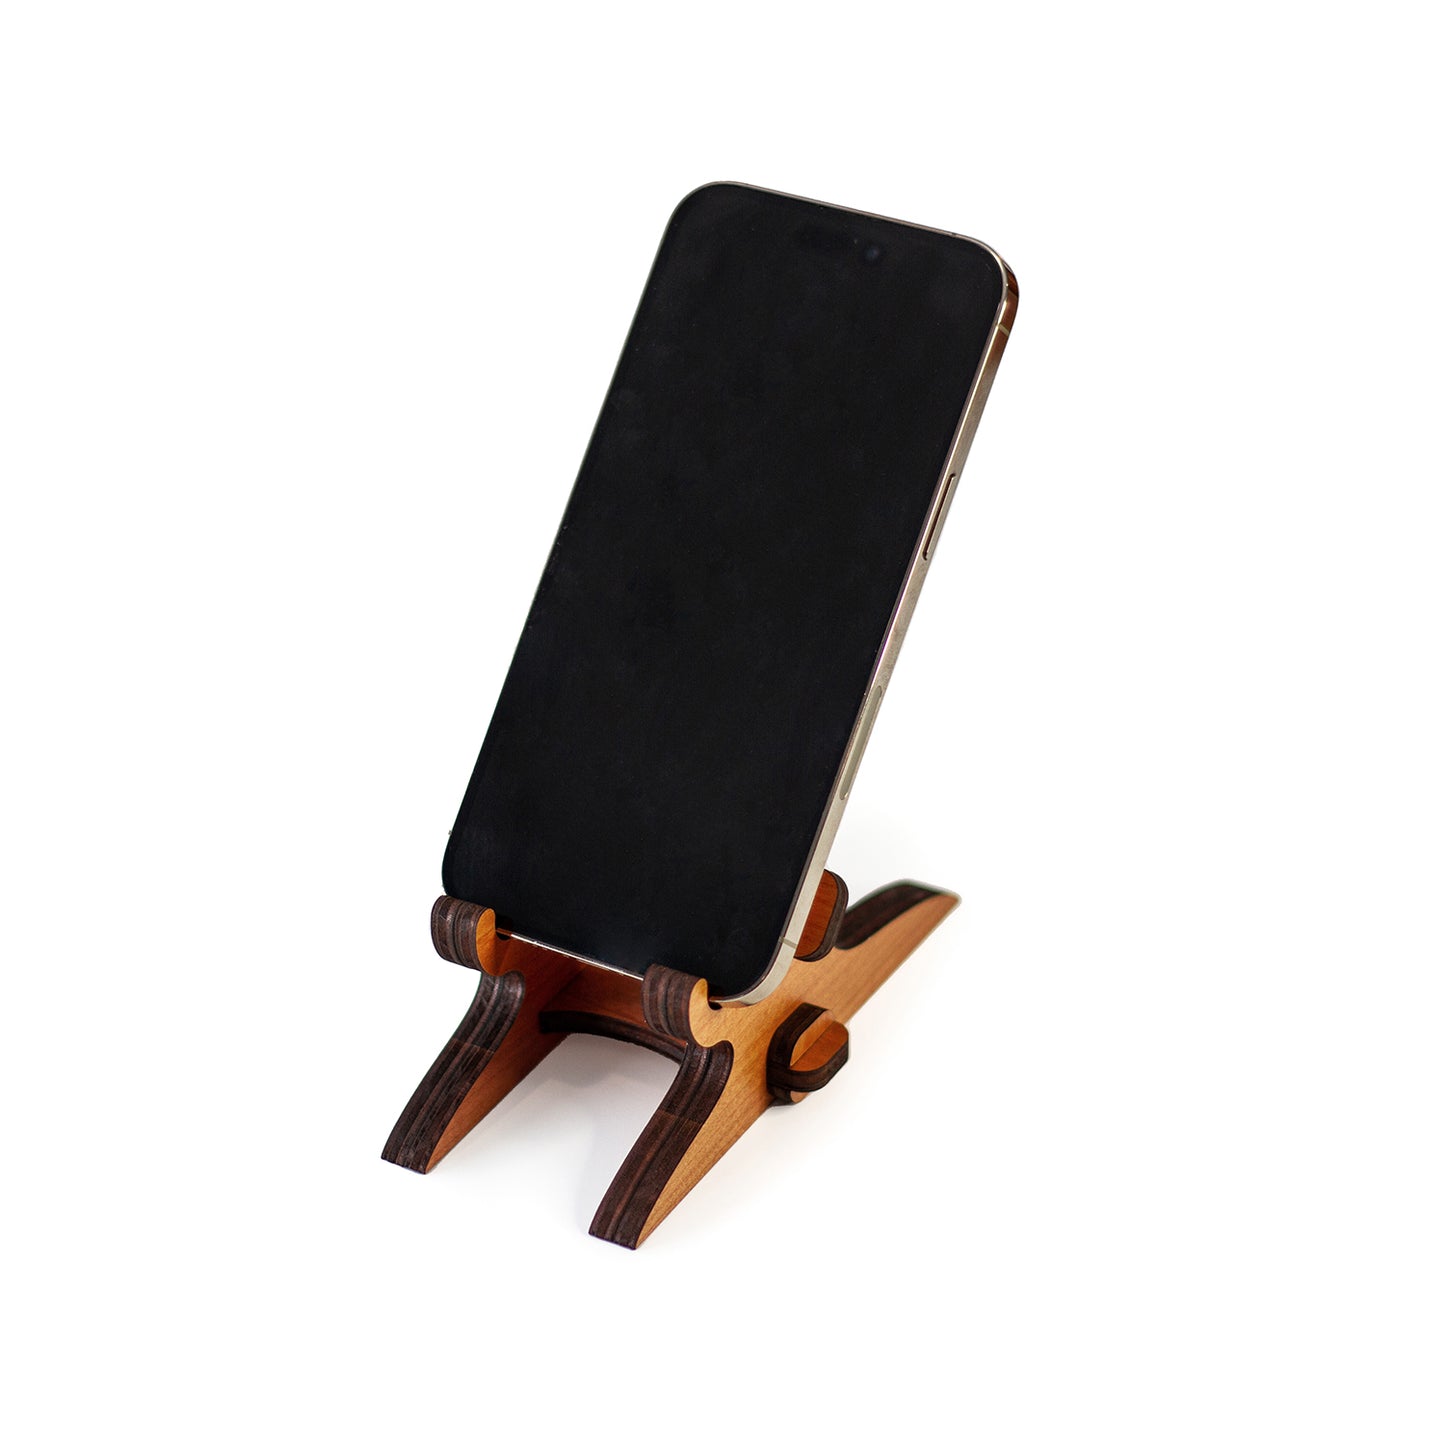 No Glue Phone and Tablet Stand - Medium Proofgrade